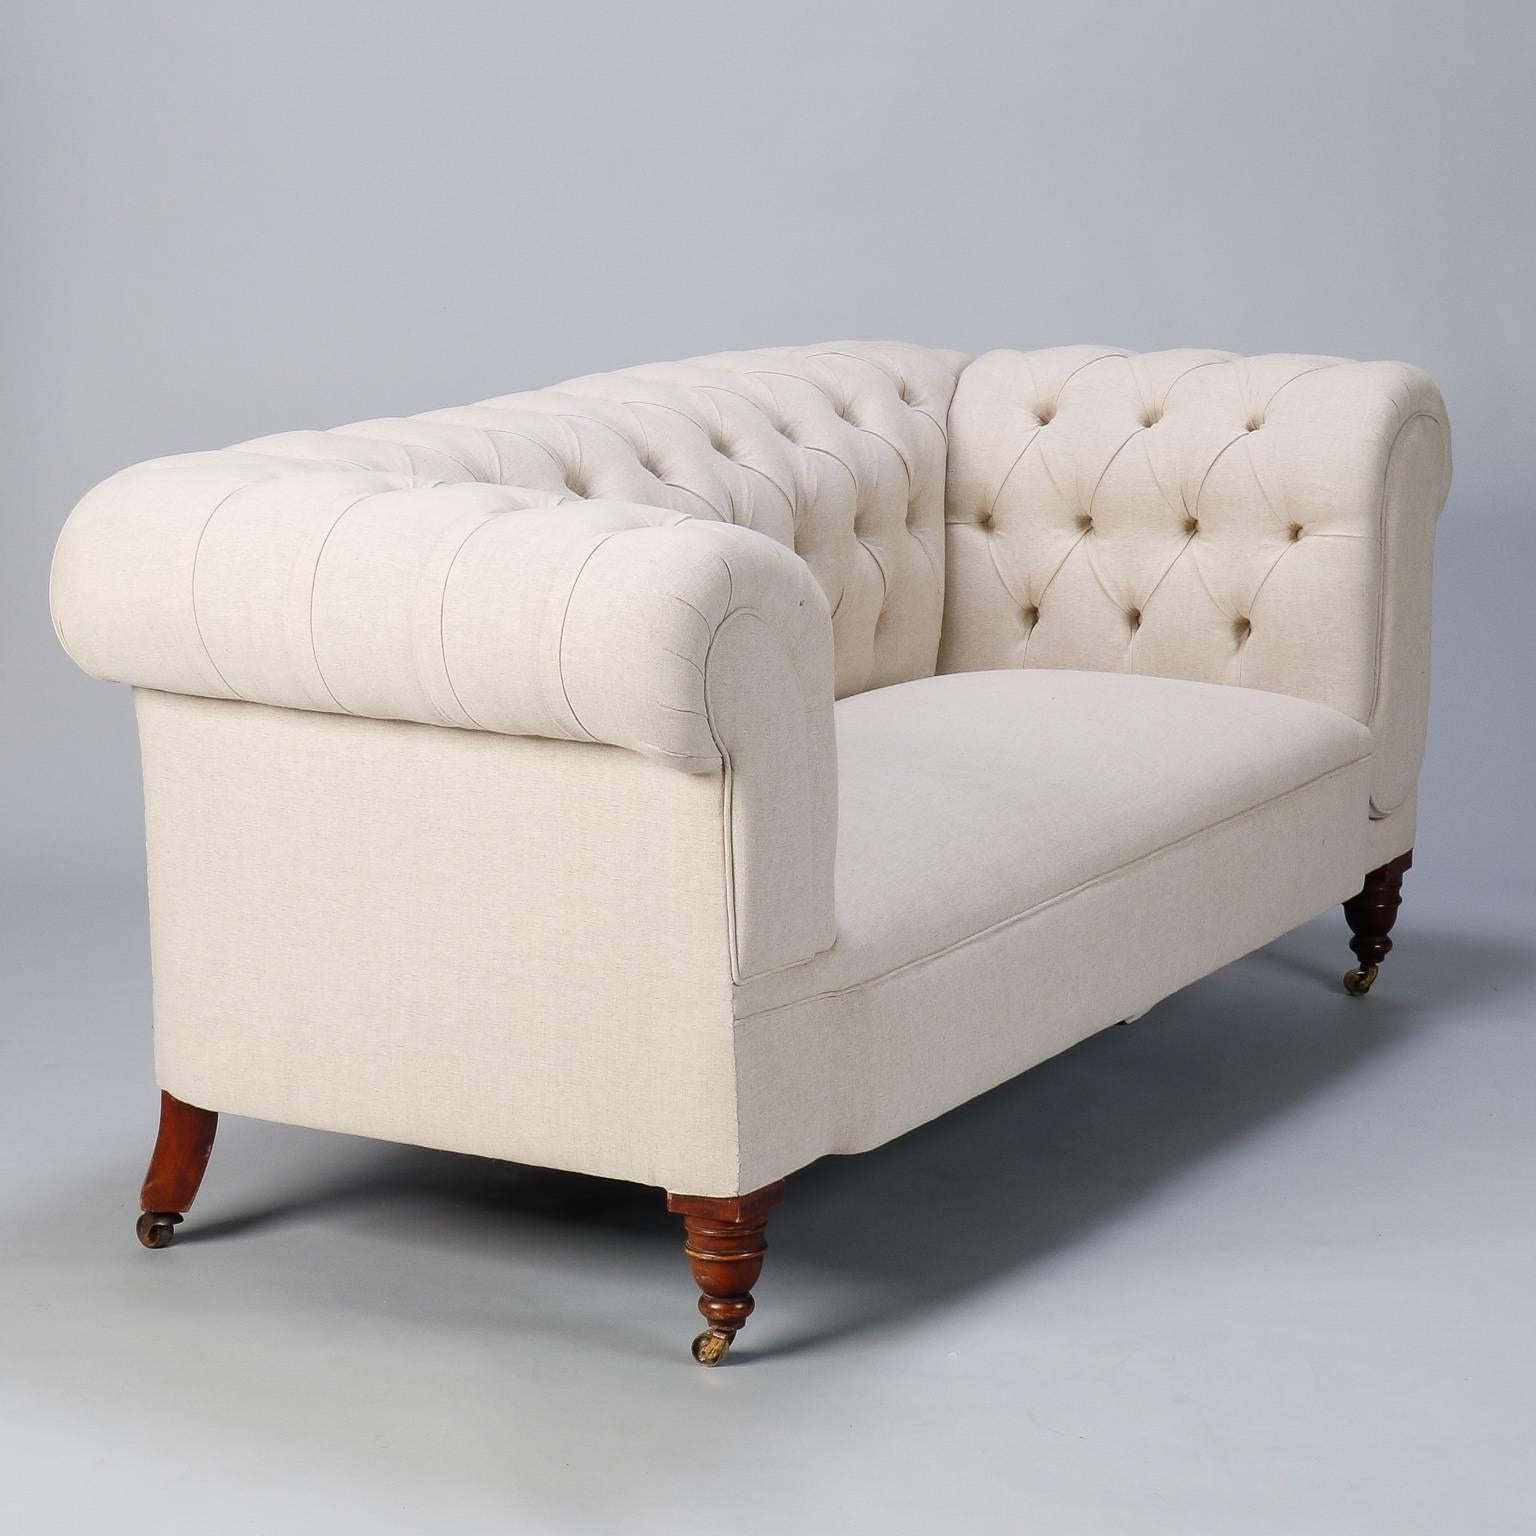 English Chesterfield sofa has been reupholstered in natural colored linen fabric, circa 1920s. Diamond tufting on inside and top of backrest and inside of rolled arms. One arm has a hinge release lever on the side that lowers the arm and allows the